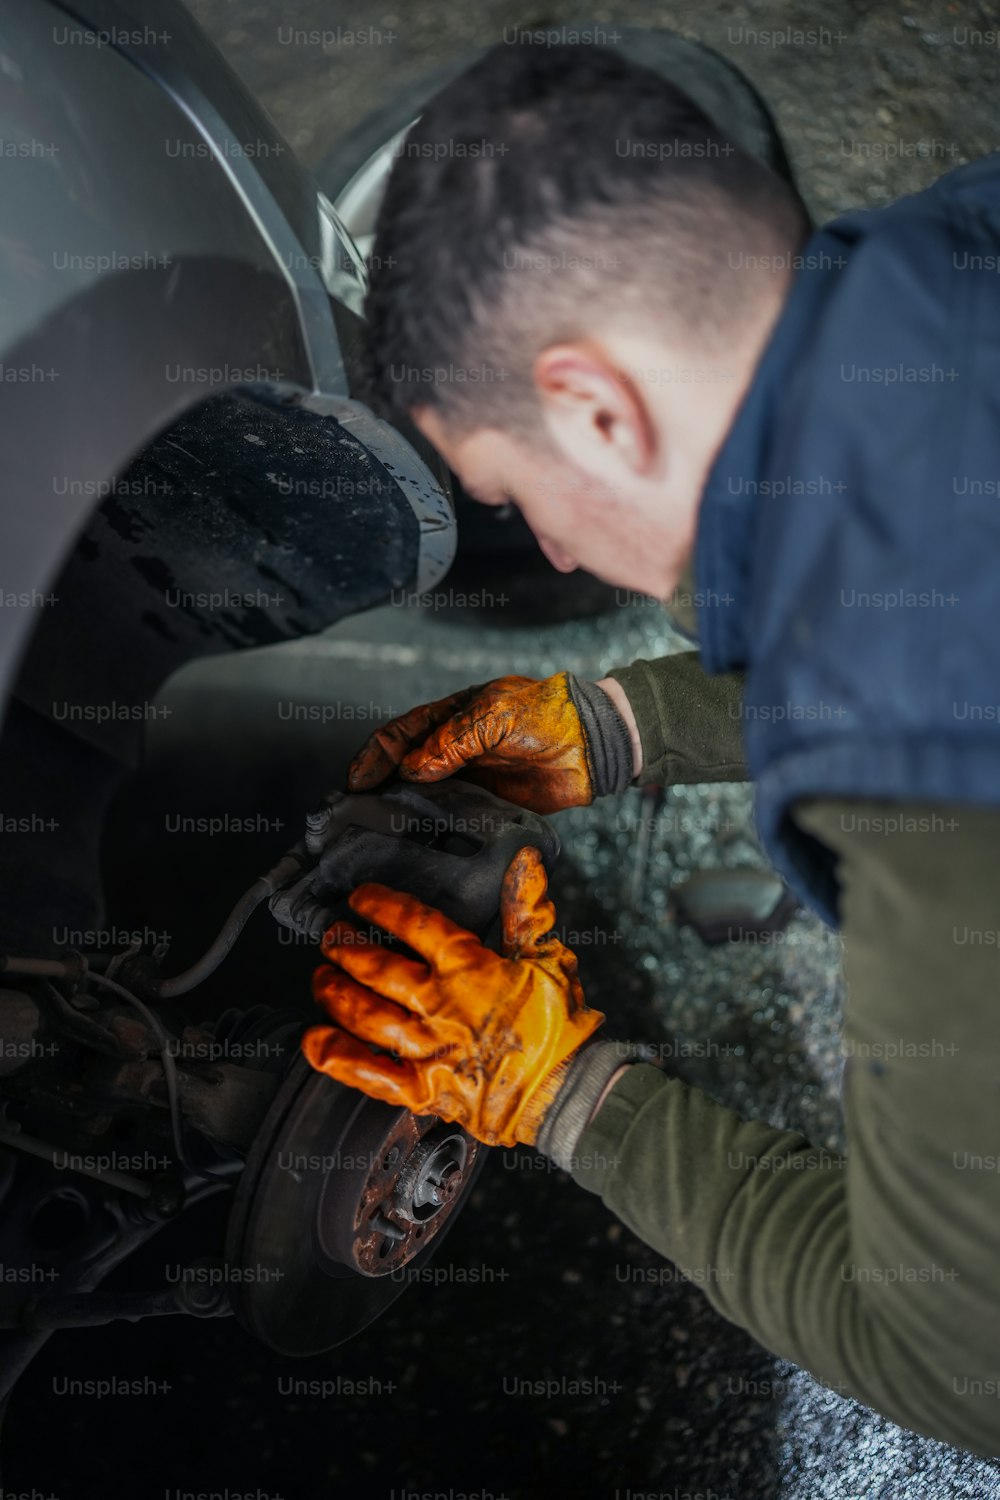 a man working on a car with gloves on